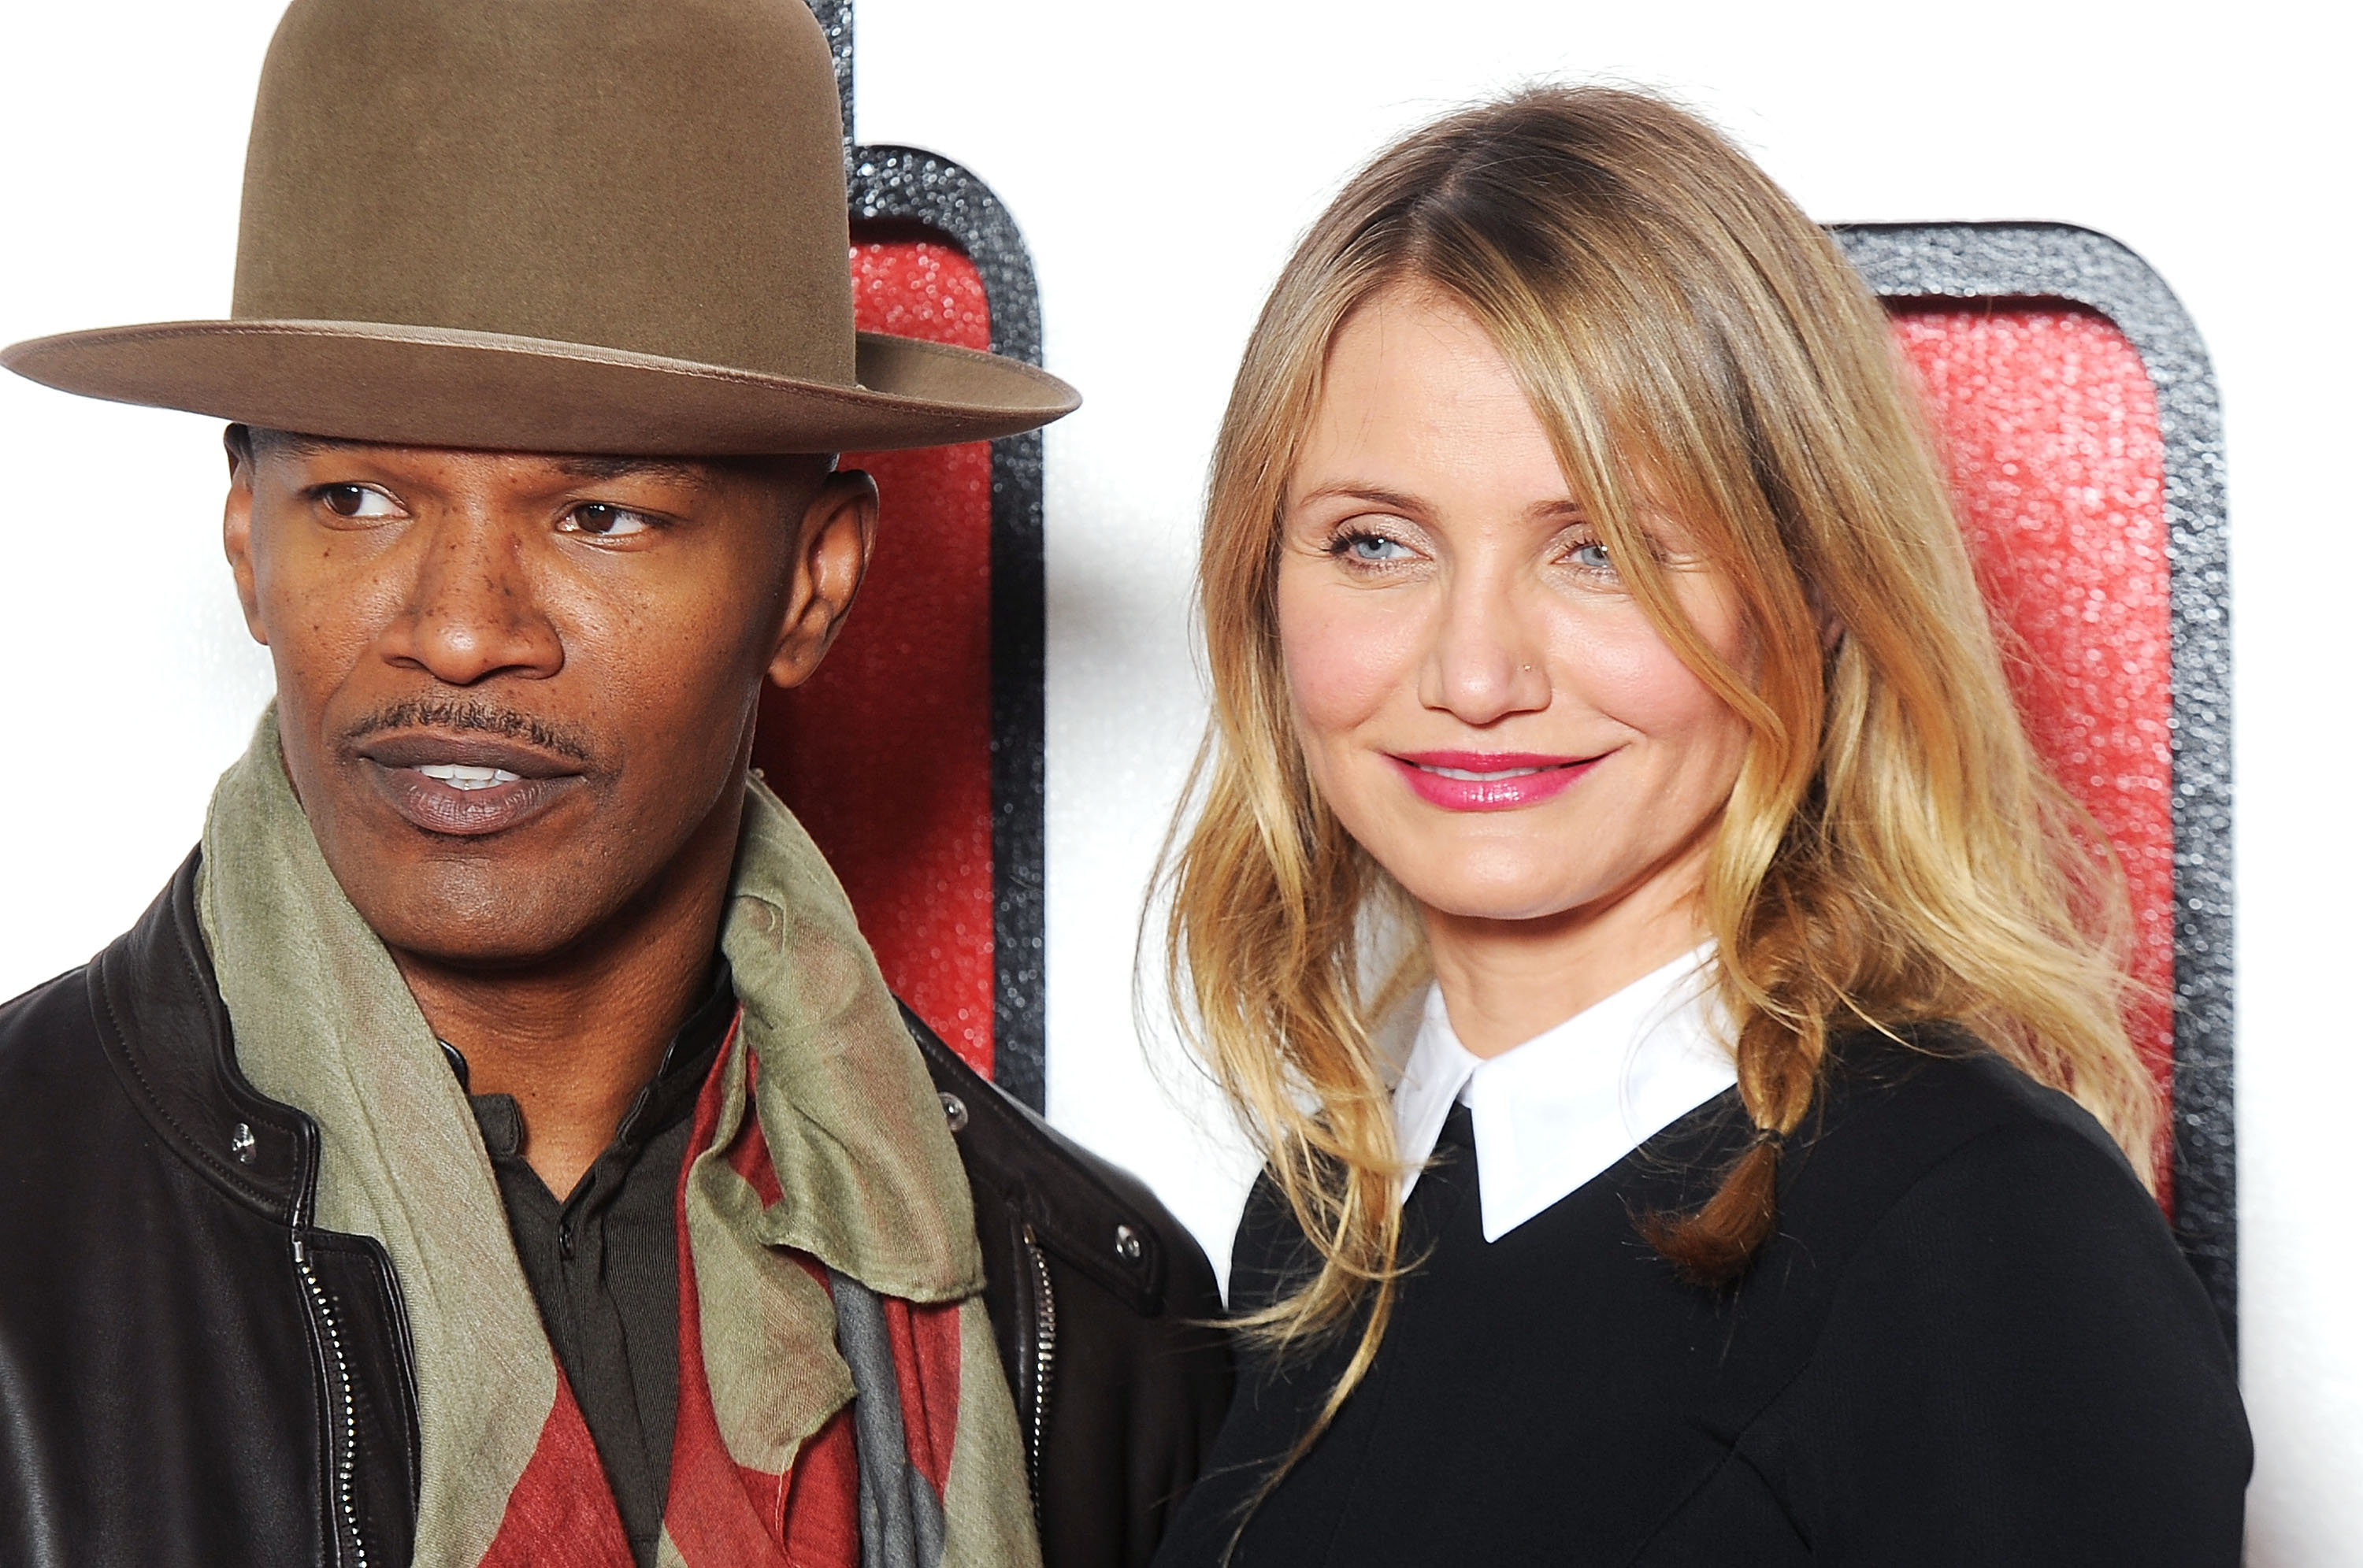 Jamie Foxx and Cameron Diaz attend a photocall for "Annie" at Corinthia Hotel London on December 16, 2014 in London, England | Source: Getty Images